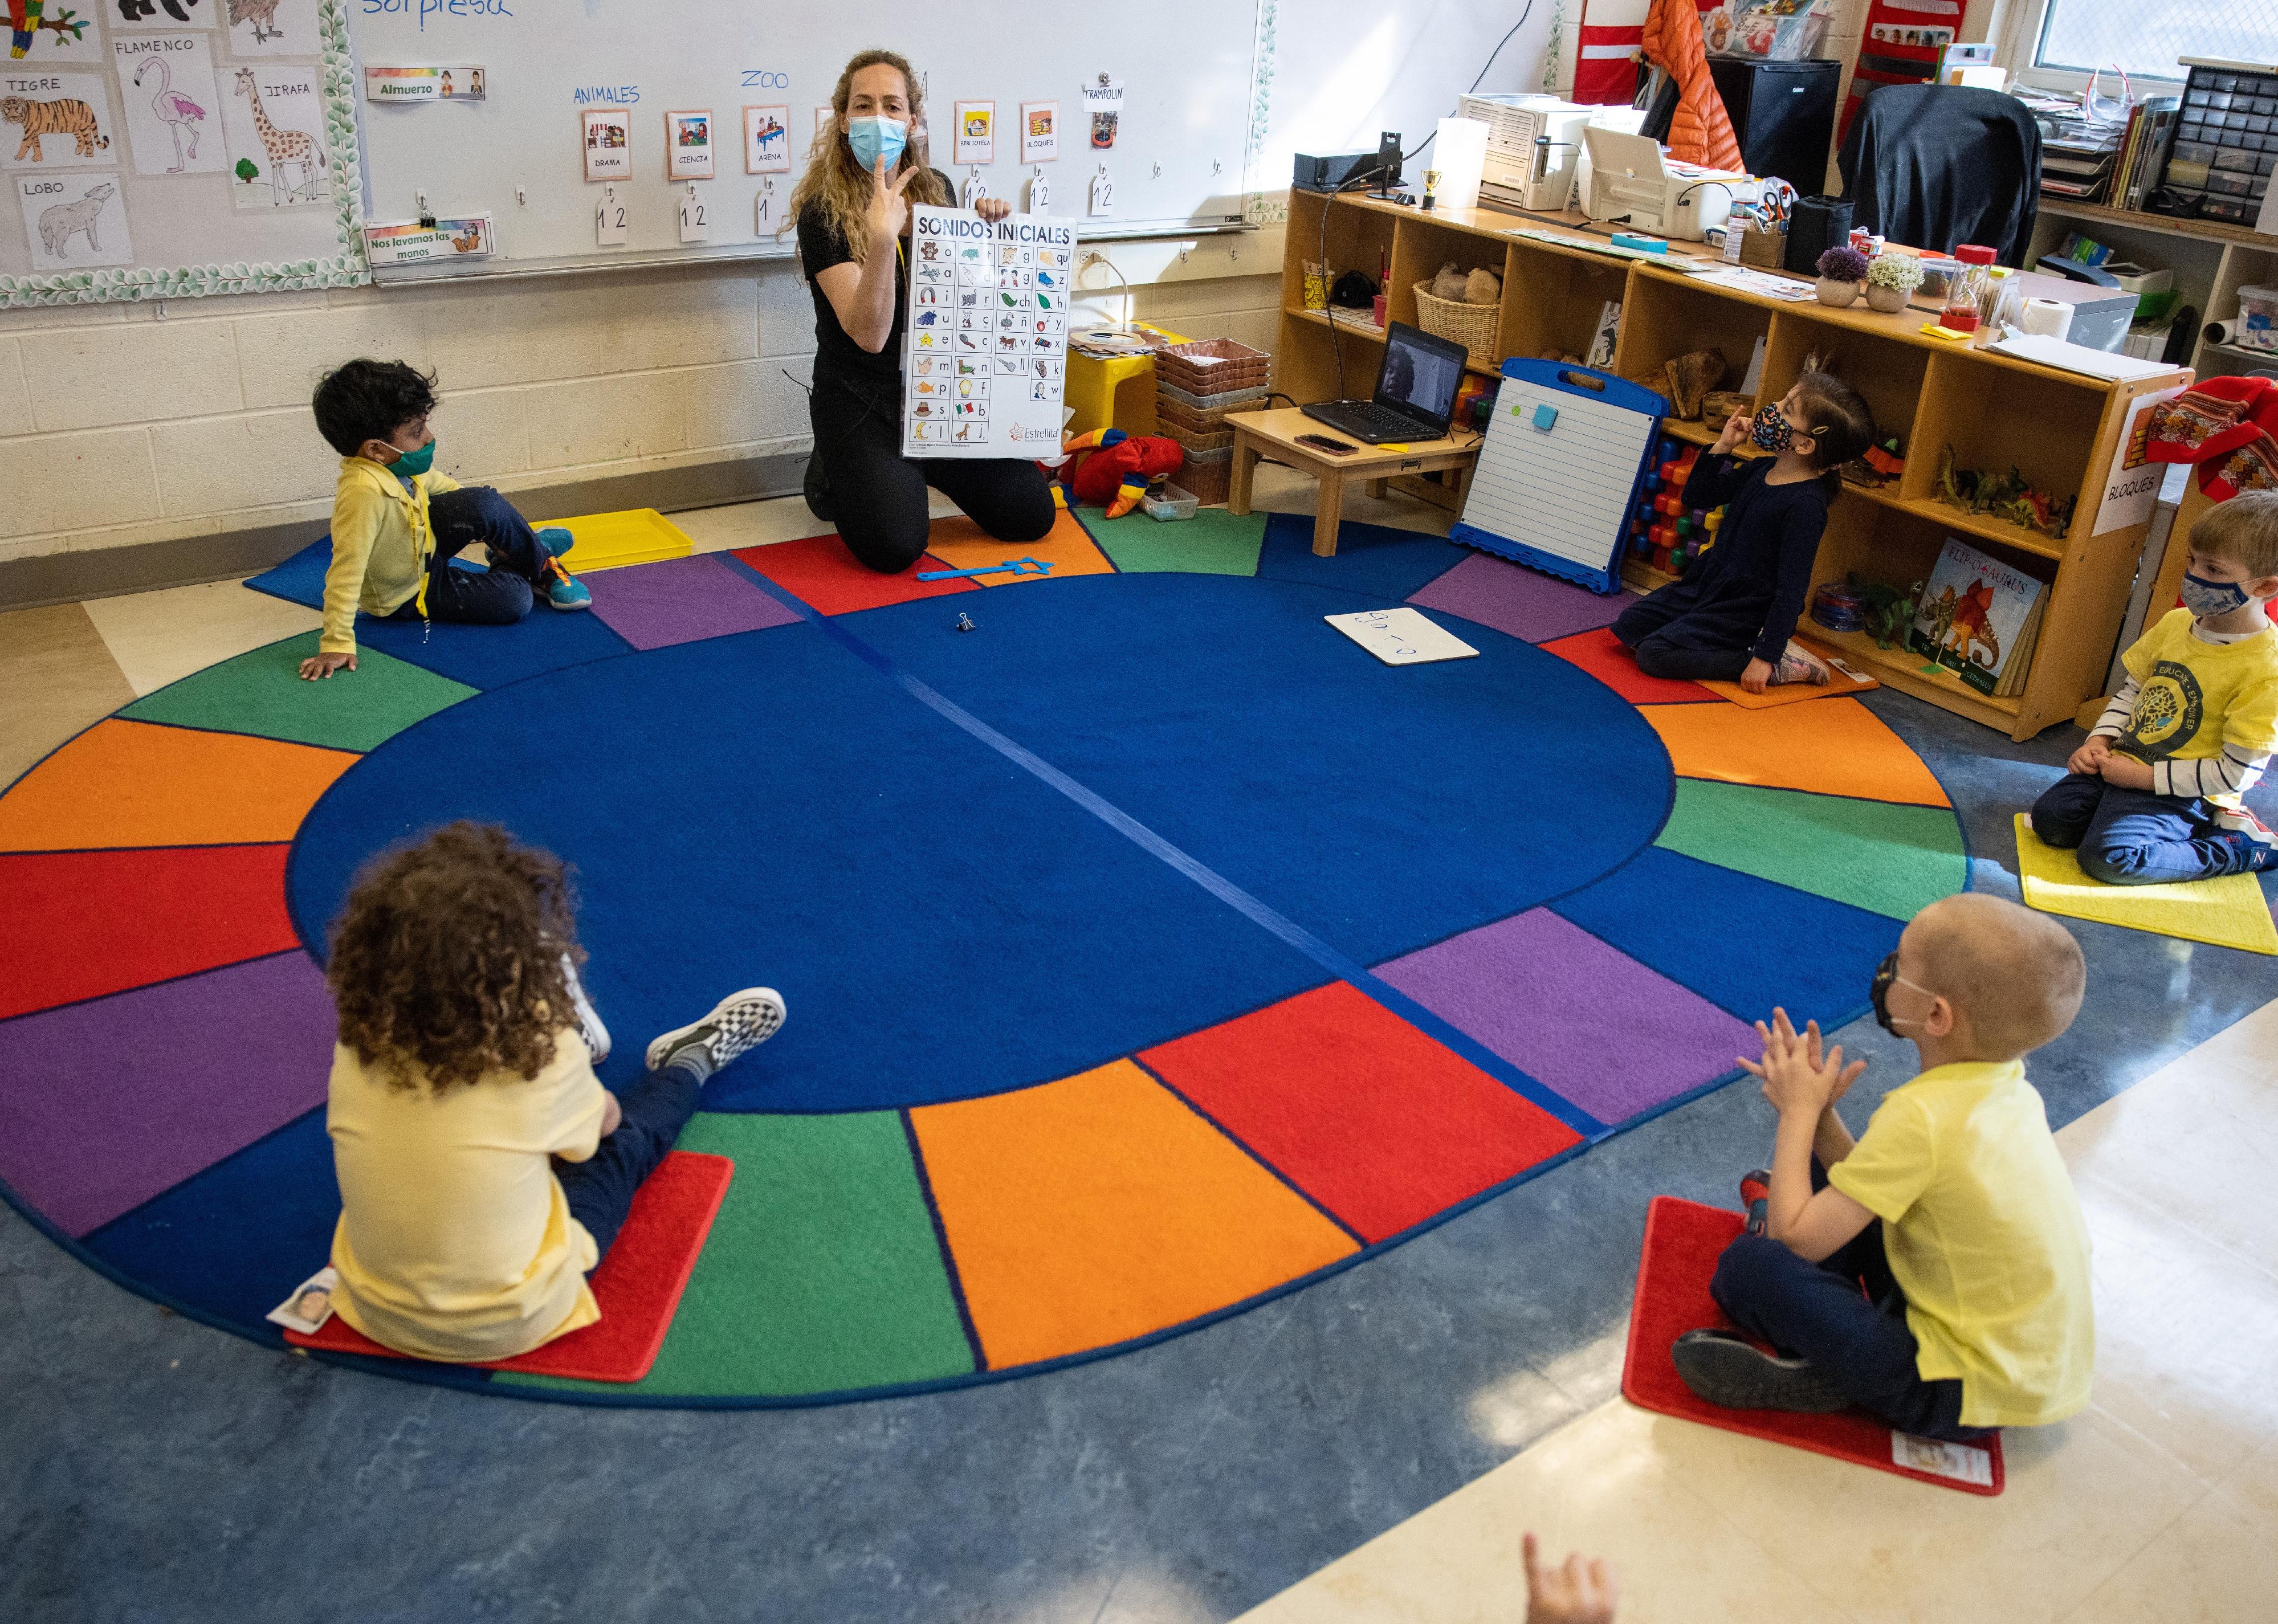 A teacher holding up a bilingual poster and using hand signals to communicate with children in a circle on the floor.